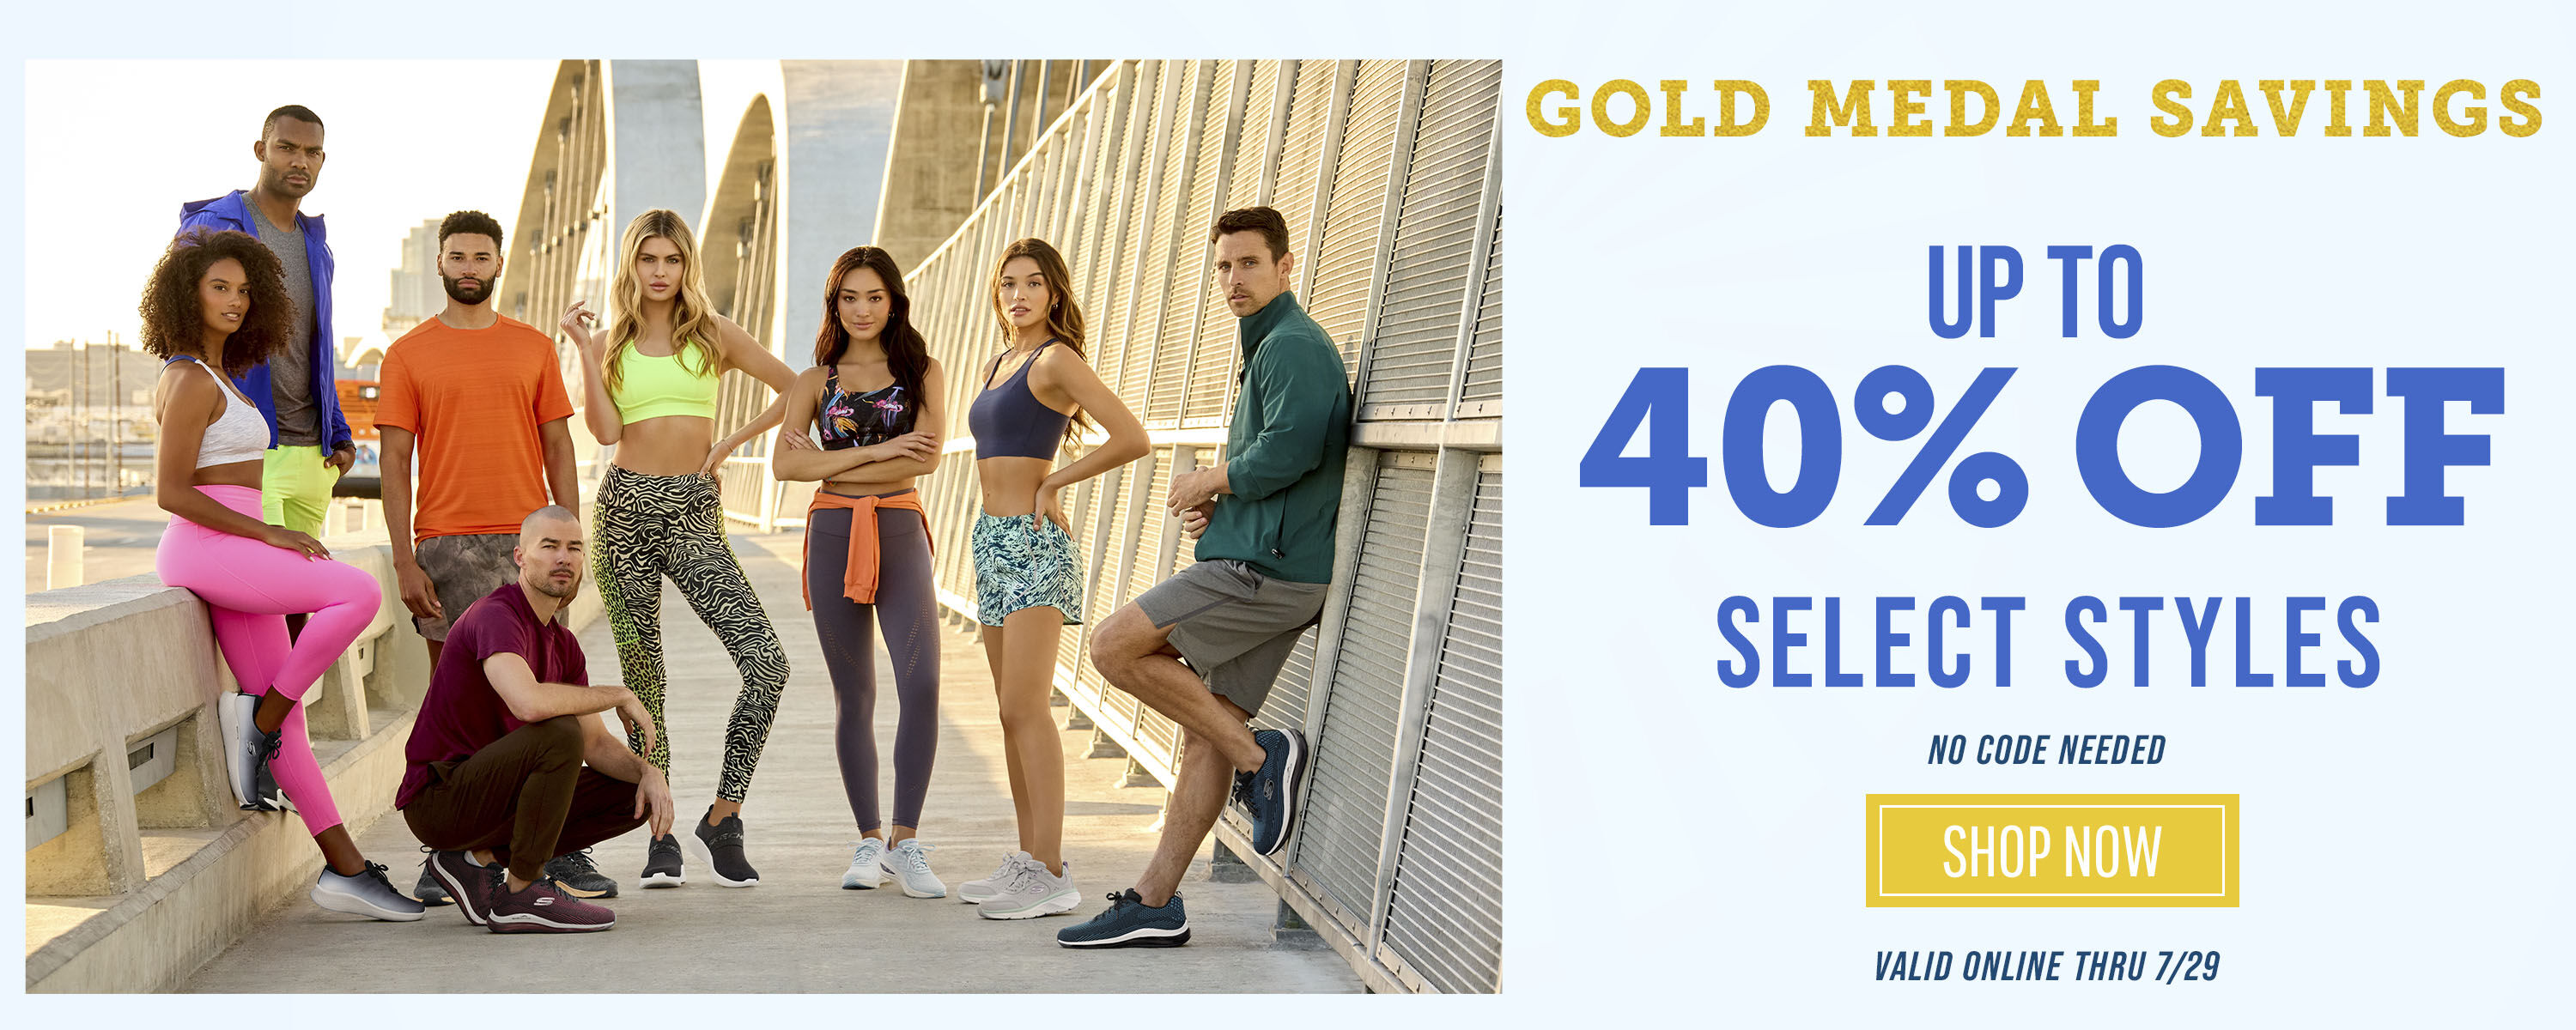 Gold Medal Savings - Up to 40% off Select Styles ~ SHOP NOW